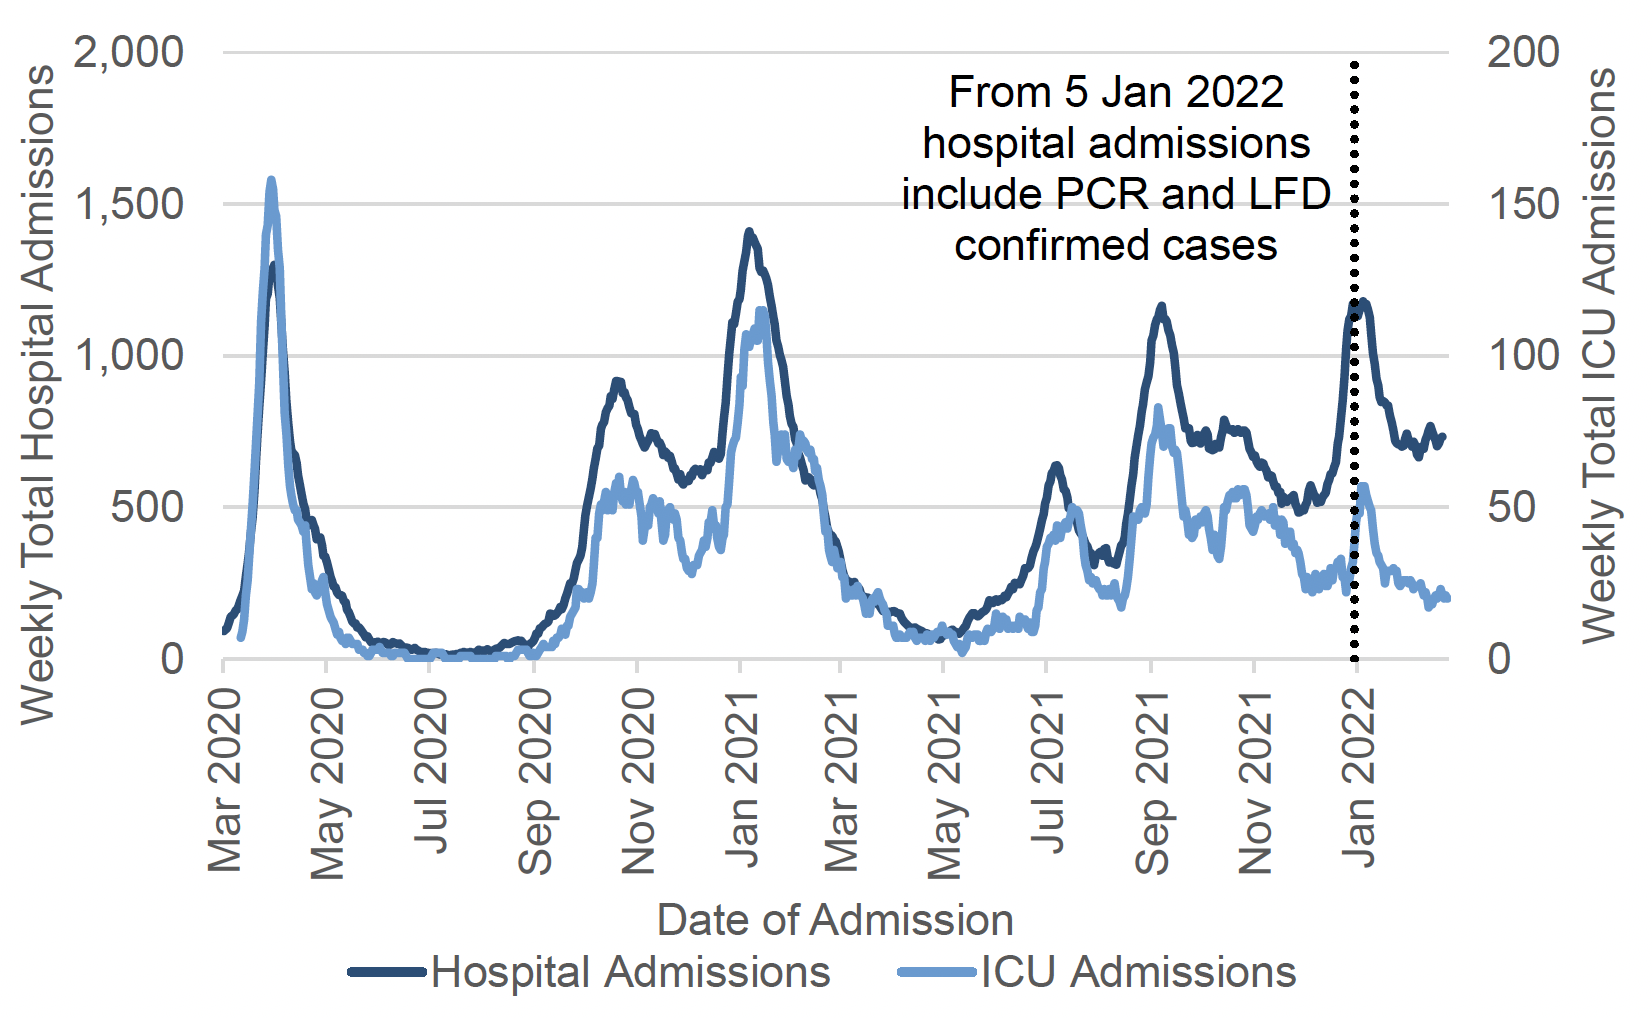 A line chart showing the total weekly number of hospital admissions with recently confirmed Covid-19 from March 2020 until February 2022, against the left axis, and the weekly number of ICU admissions against the right axis. Both hospital and ICU admissions peaked in March 2020, October 2020, January 2021, July 2021, September 2021 and January 2022. The chart has a note that says: “from 5 January 2022 hospital admissions include PCR and LFD confirmed cases”. Before 5 January 2022, hospital admissions include only PCR confirmed cases.